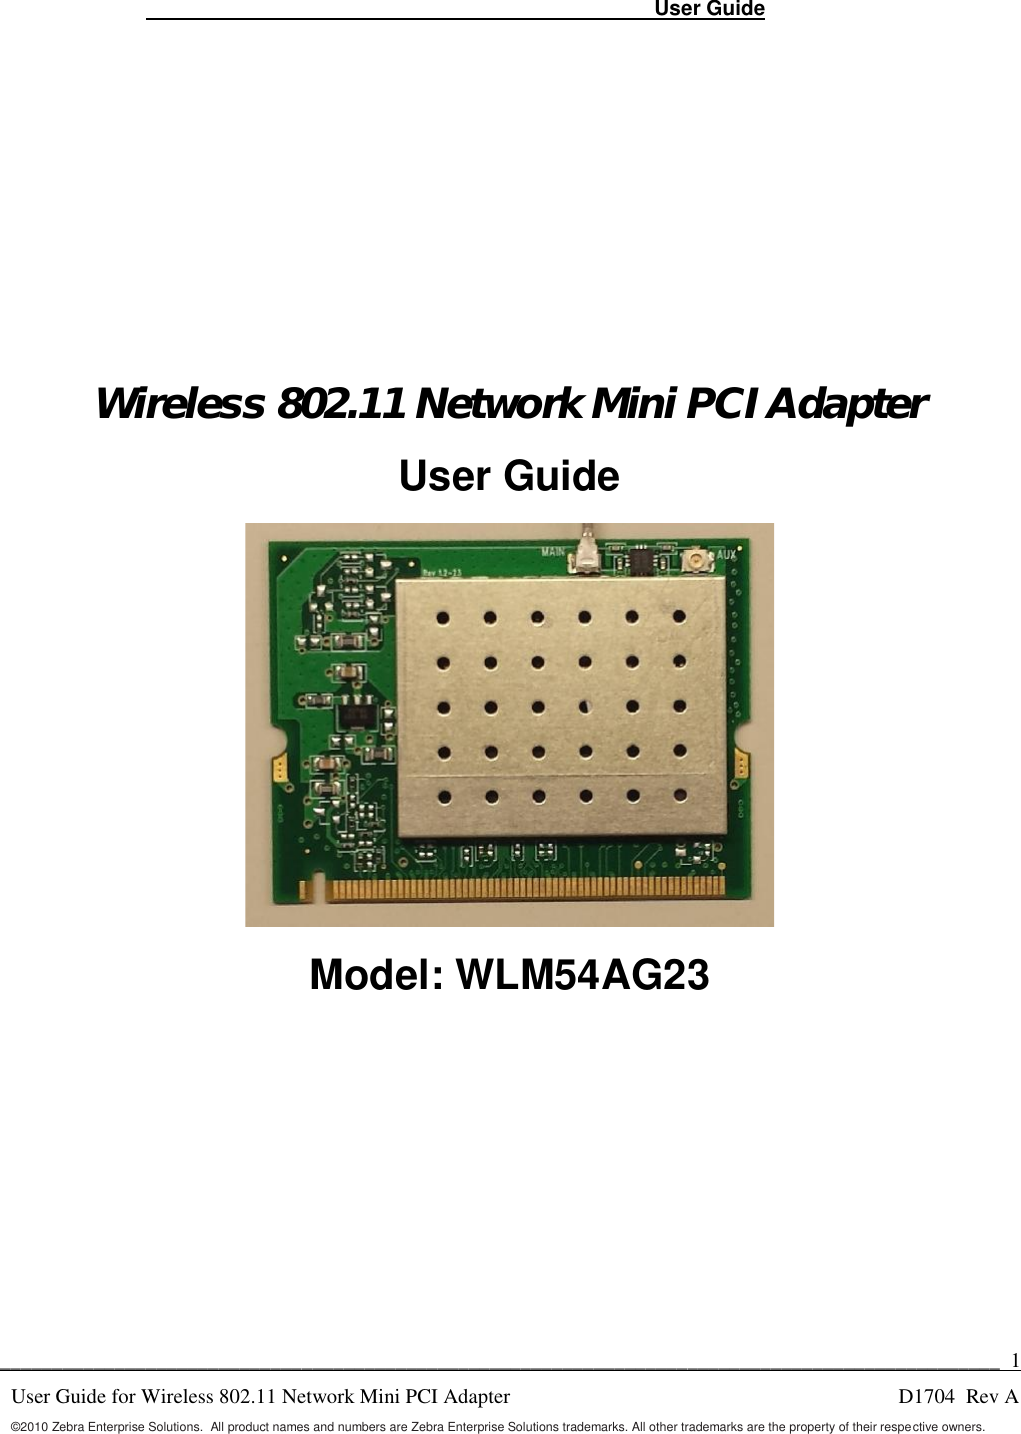 User Guide________________________________________________________________________________________________ 1User Guide for Wireless 802.11 Network Mini PCI AdapterD1704 Rev A©2010 Zebra Enterprise Solutions. All product names and numbers are Zebra Enterprise Solutions trademarks. All other trademarks are the property of their respe ctive owners.Wireless 802.11 Network Mini PCI AdapterUser GuideModel: WLM54AG23